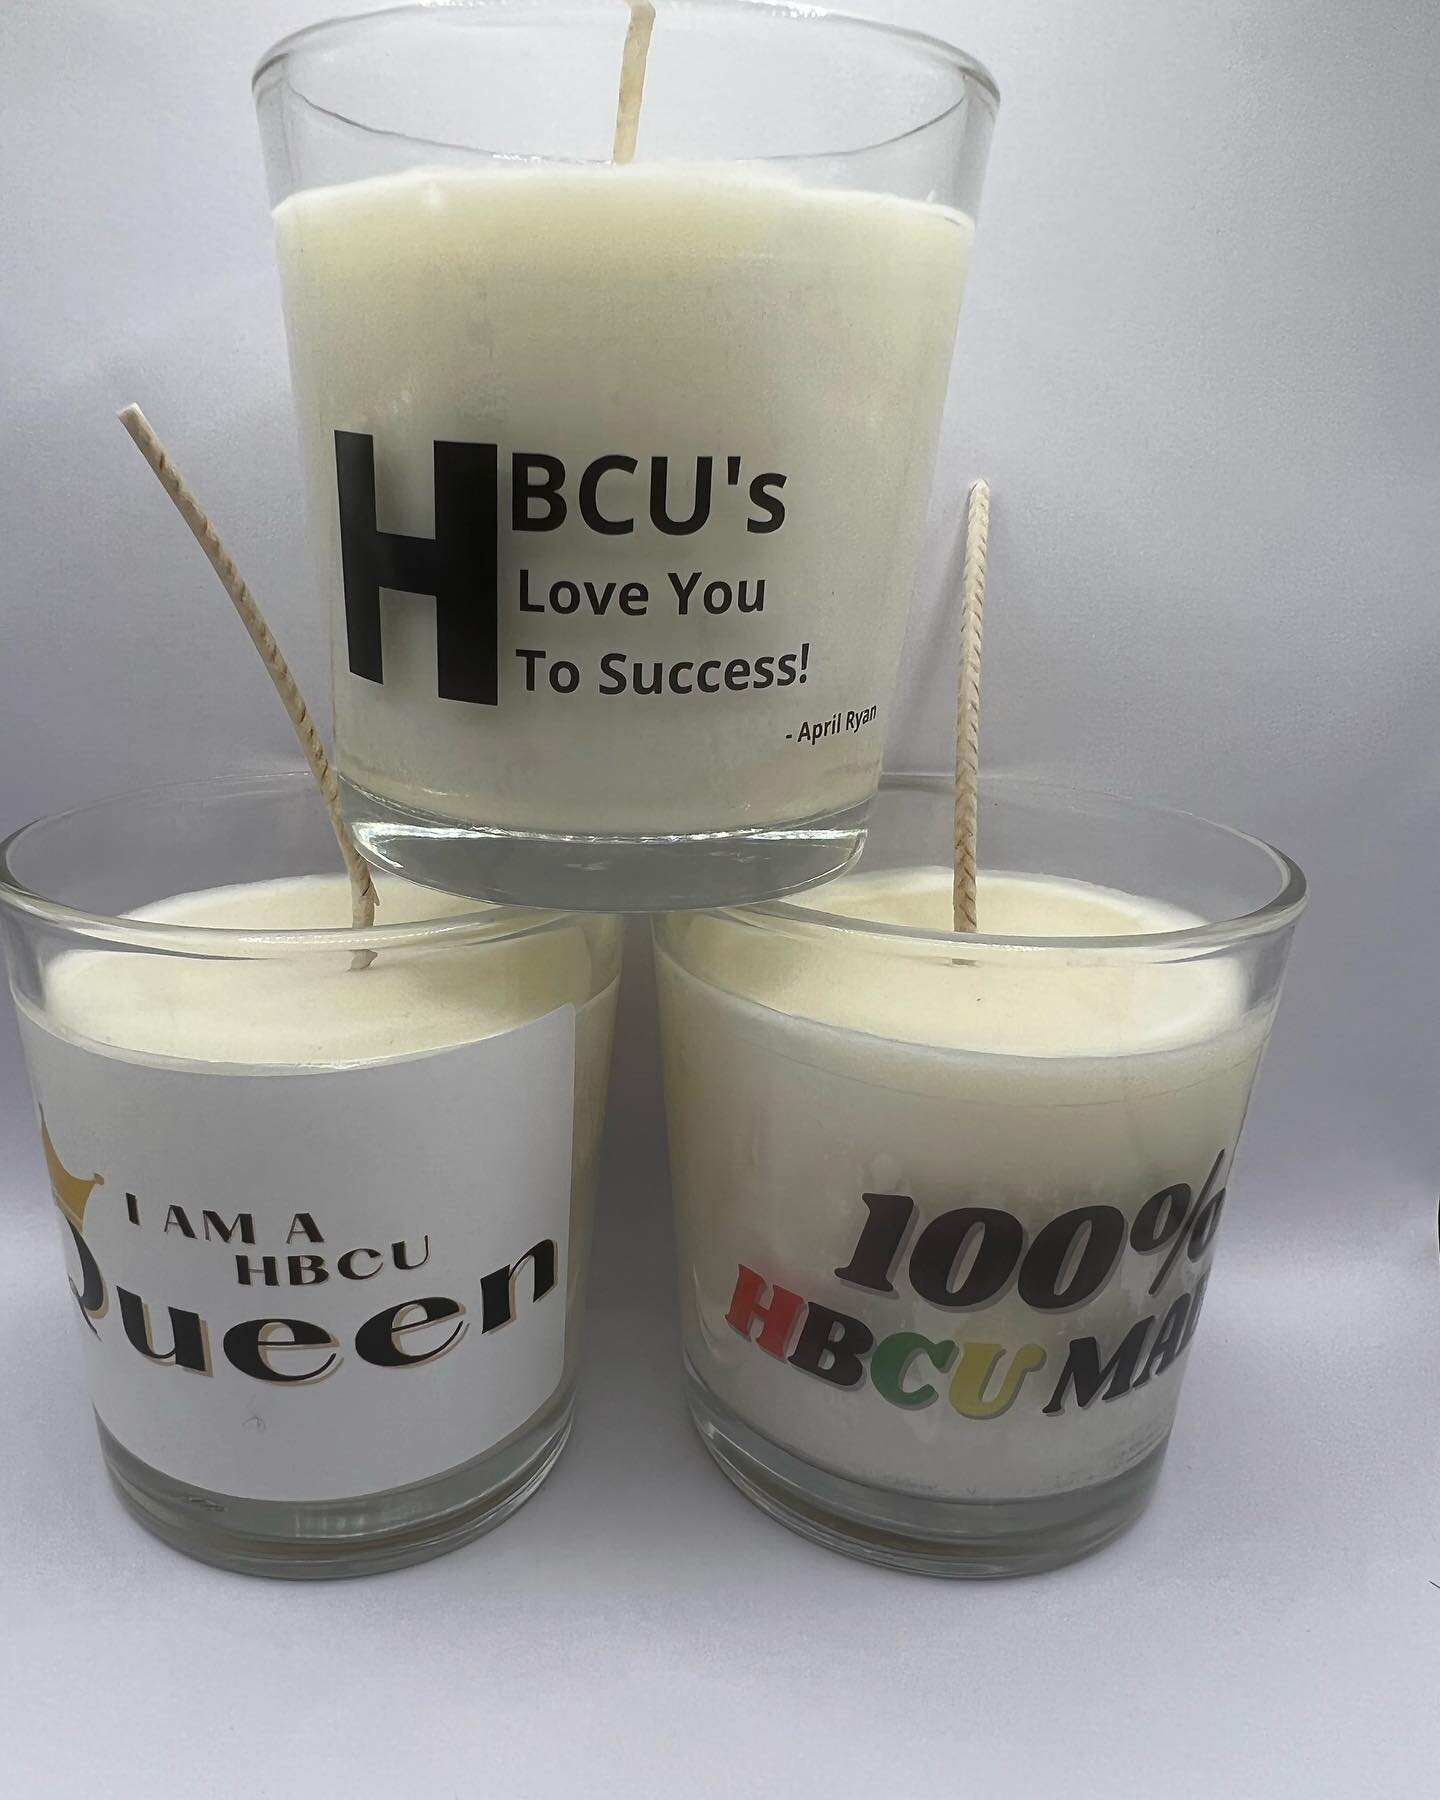 HBCU is Black History - check out HBCU custom labels above by clicking on the candles to get yours now! Or visit us at Jarecandles.com